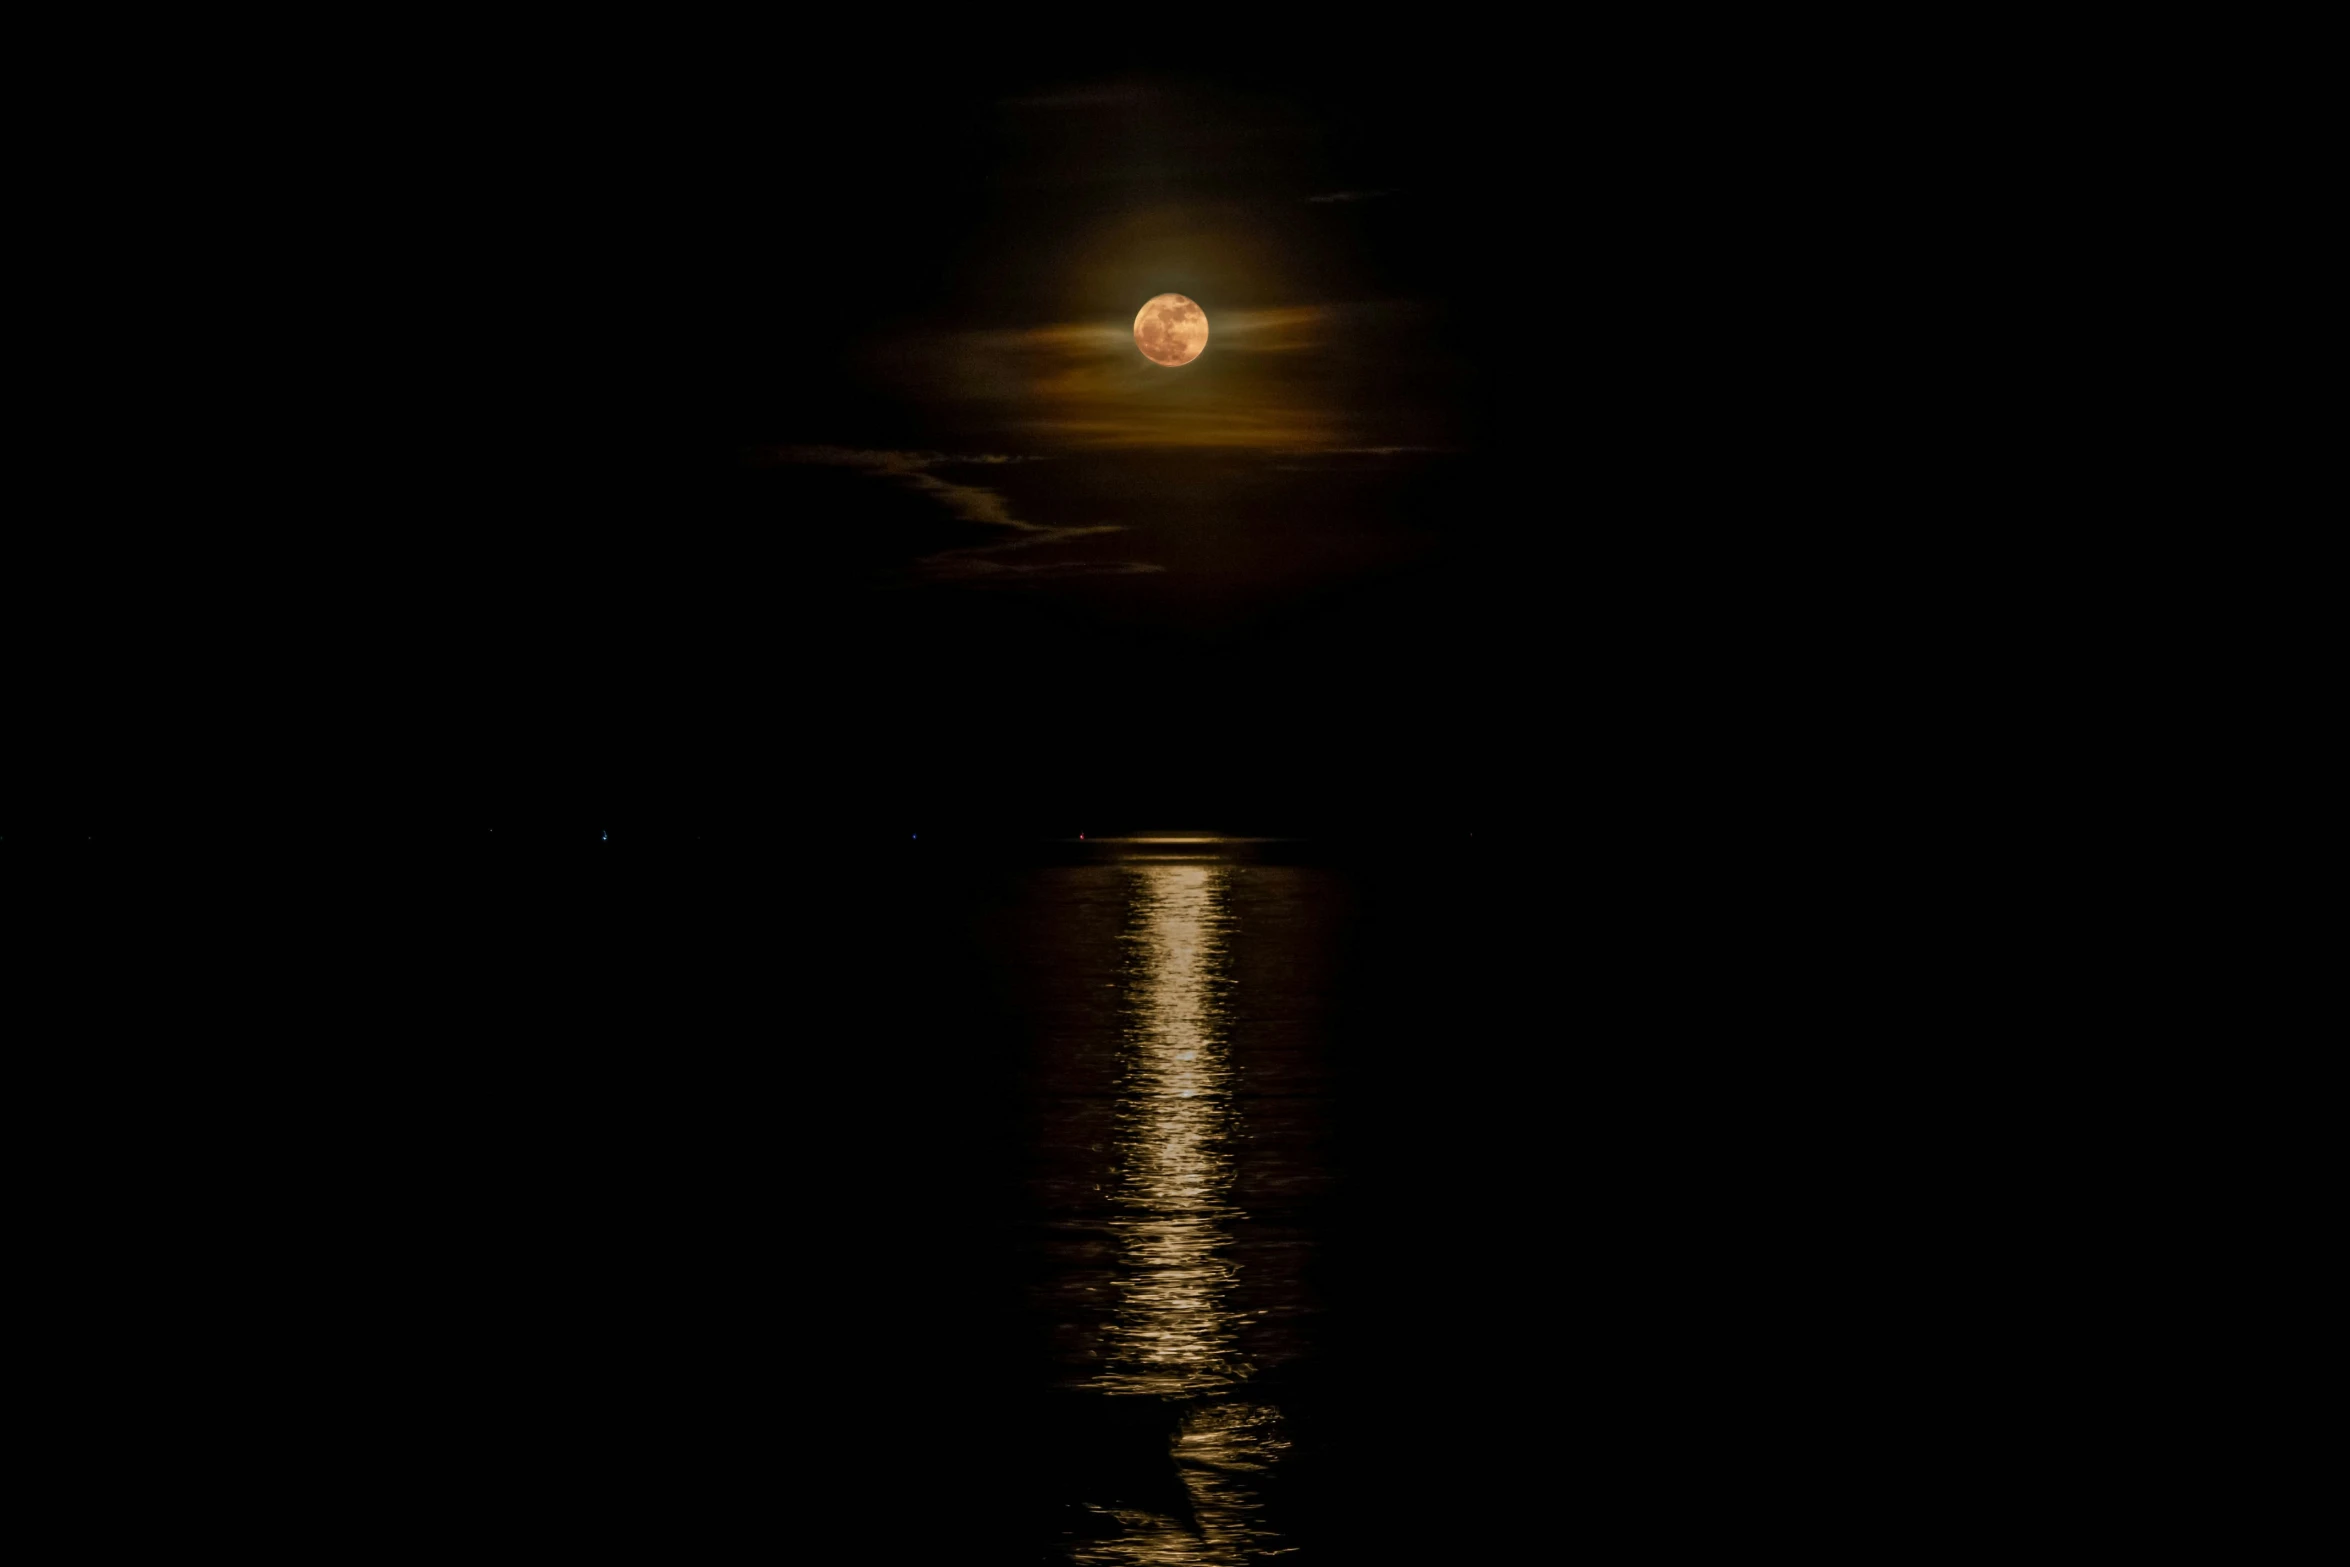 the moon is rising over the water at night